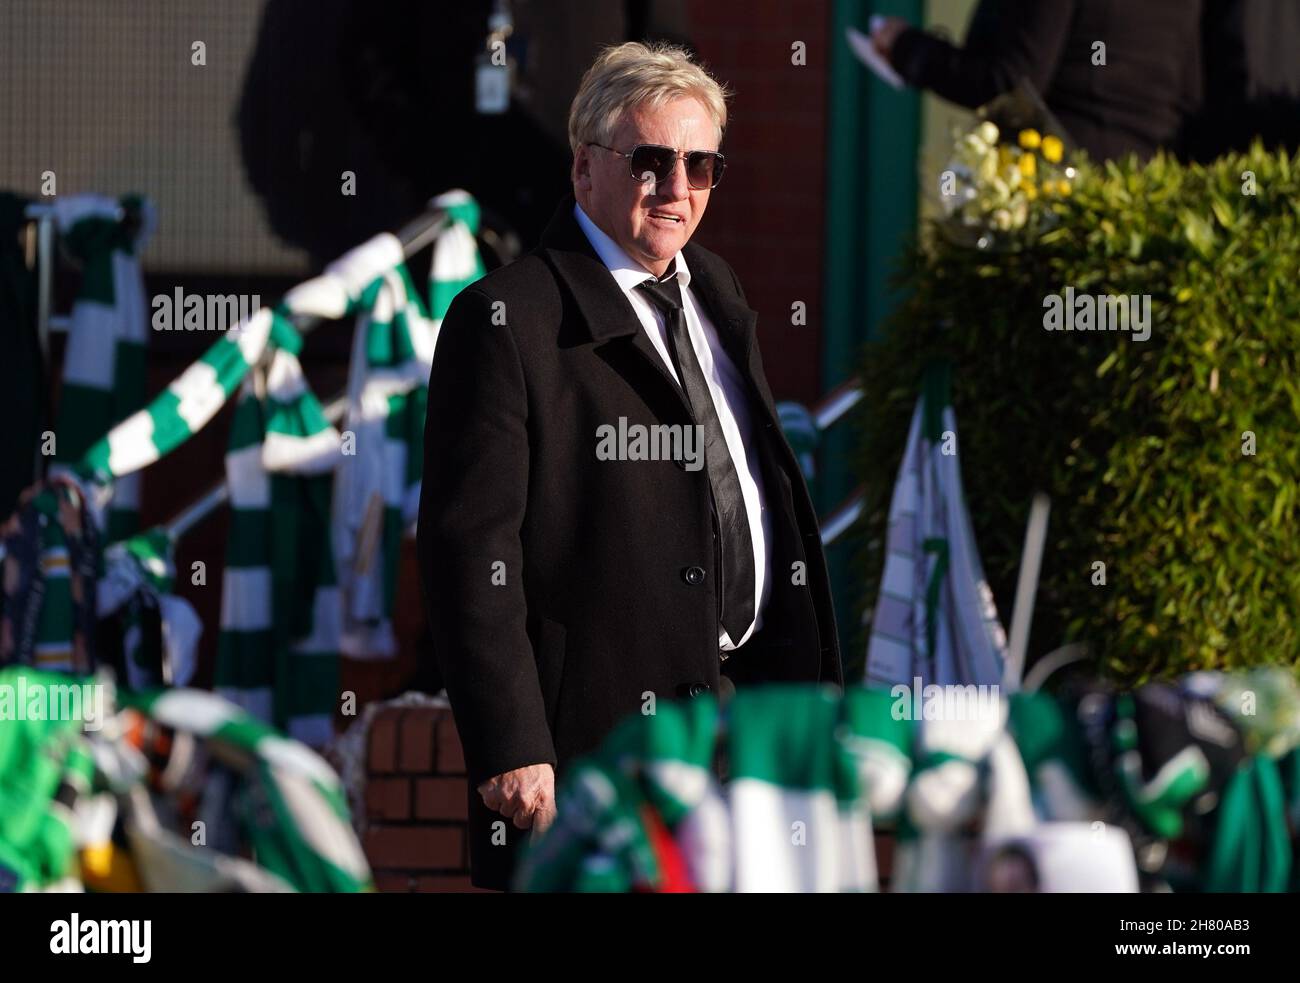 Frank McAvennie ahead of  the funeral service of former Celtic player Bertie Auld. Auld, one of Celtic's European Cup heroes, died at the age of 83 on November 14, 2021. The midfielder scored 85 goals in 283 appearances over two spells for Celtic, the most famous game of which was the 1967 European Cup final win against Inter Milan in Lisbon. Picture date: Friday November 26, 2021. See PA story SOCCER Auld. Photo credit should read: Andrew Milligan/PA Wire. RESTRICTIONS: Use subject to restrictions. Editorial use only, no commercial use without prior consent from rights holder. Stock Photo